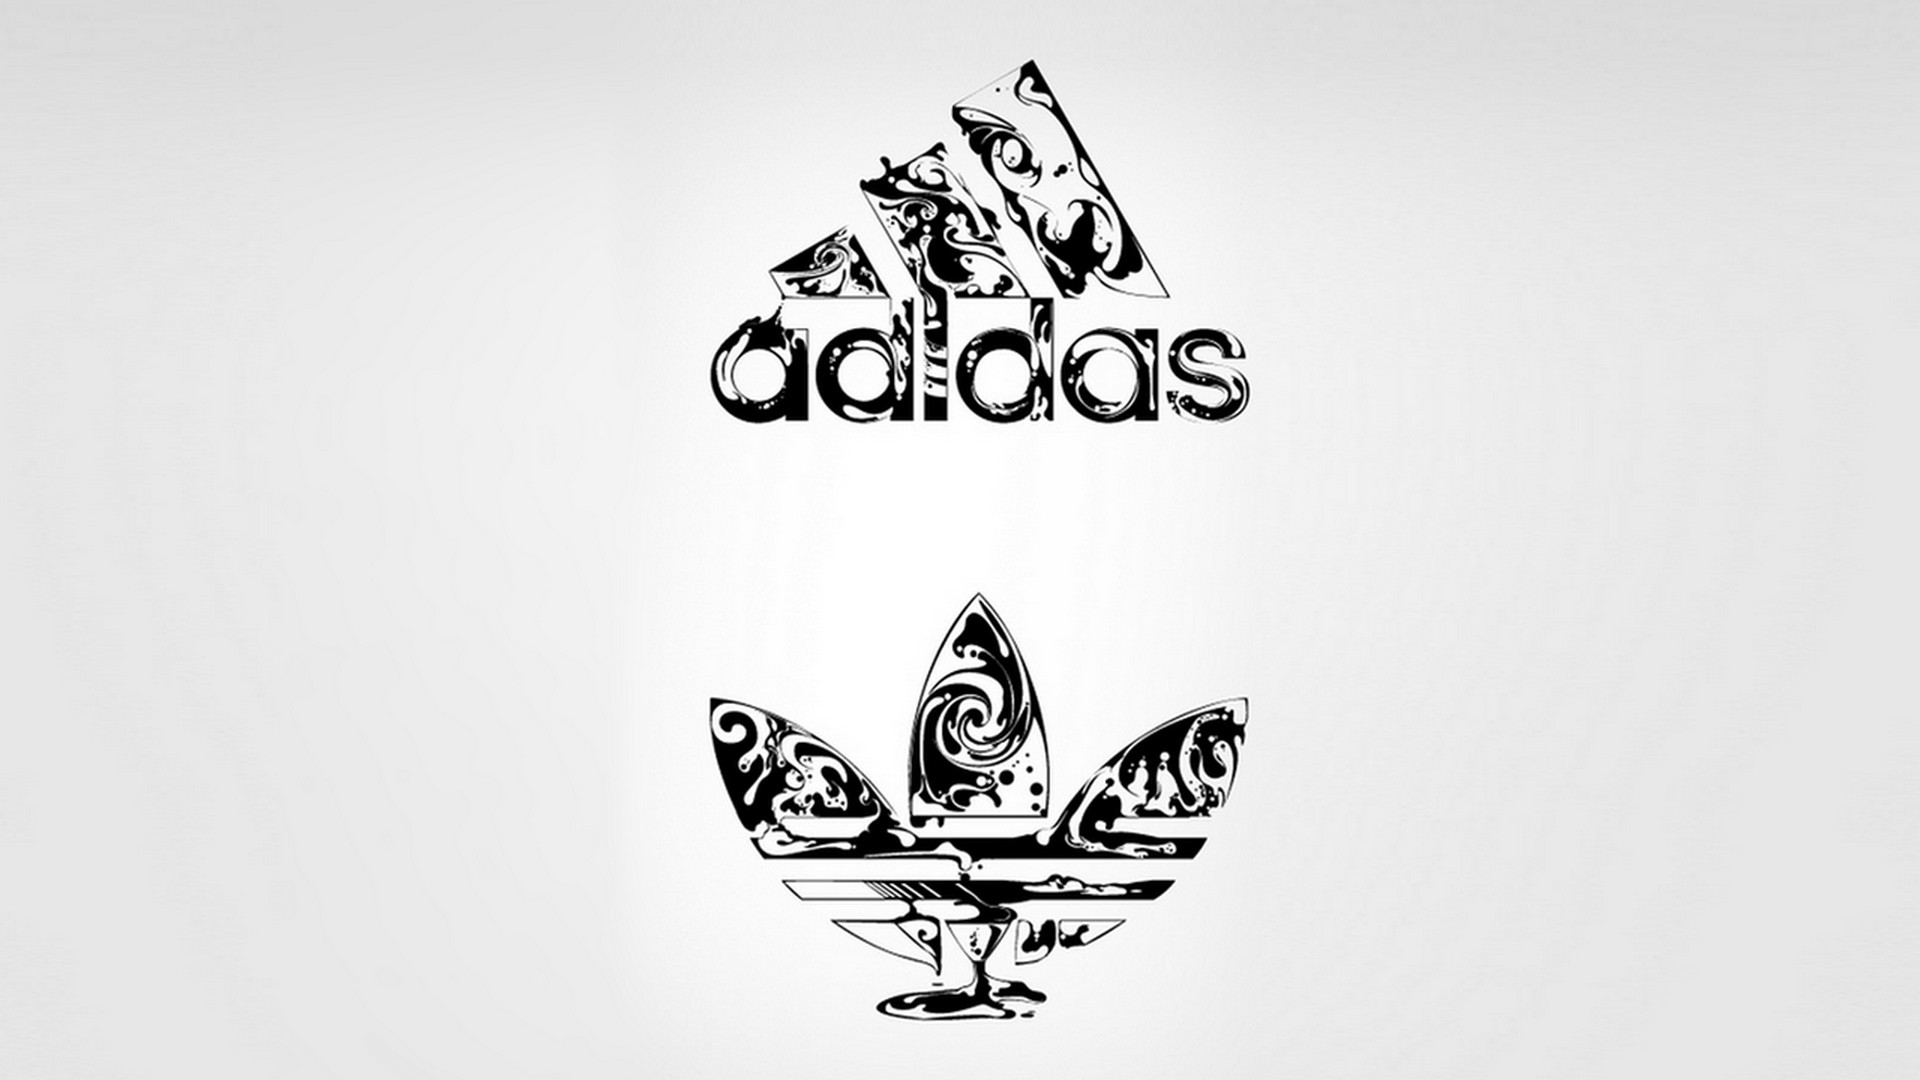 Computer Wallpapers Adidas Logo with high-resolution 1920x1080 pixel. You can use this wallpaper for your Windows and Mac OS computers as well as your Android and iPhone smartphones